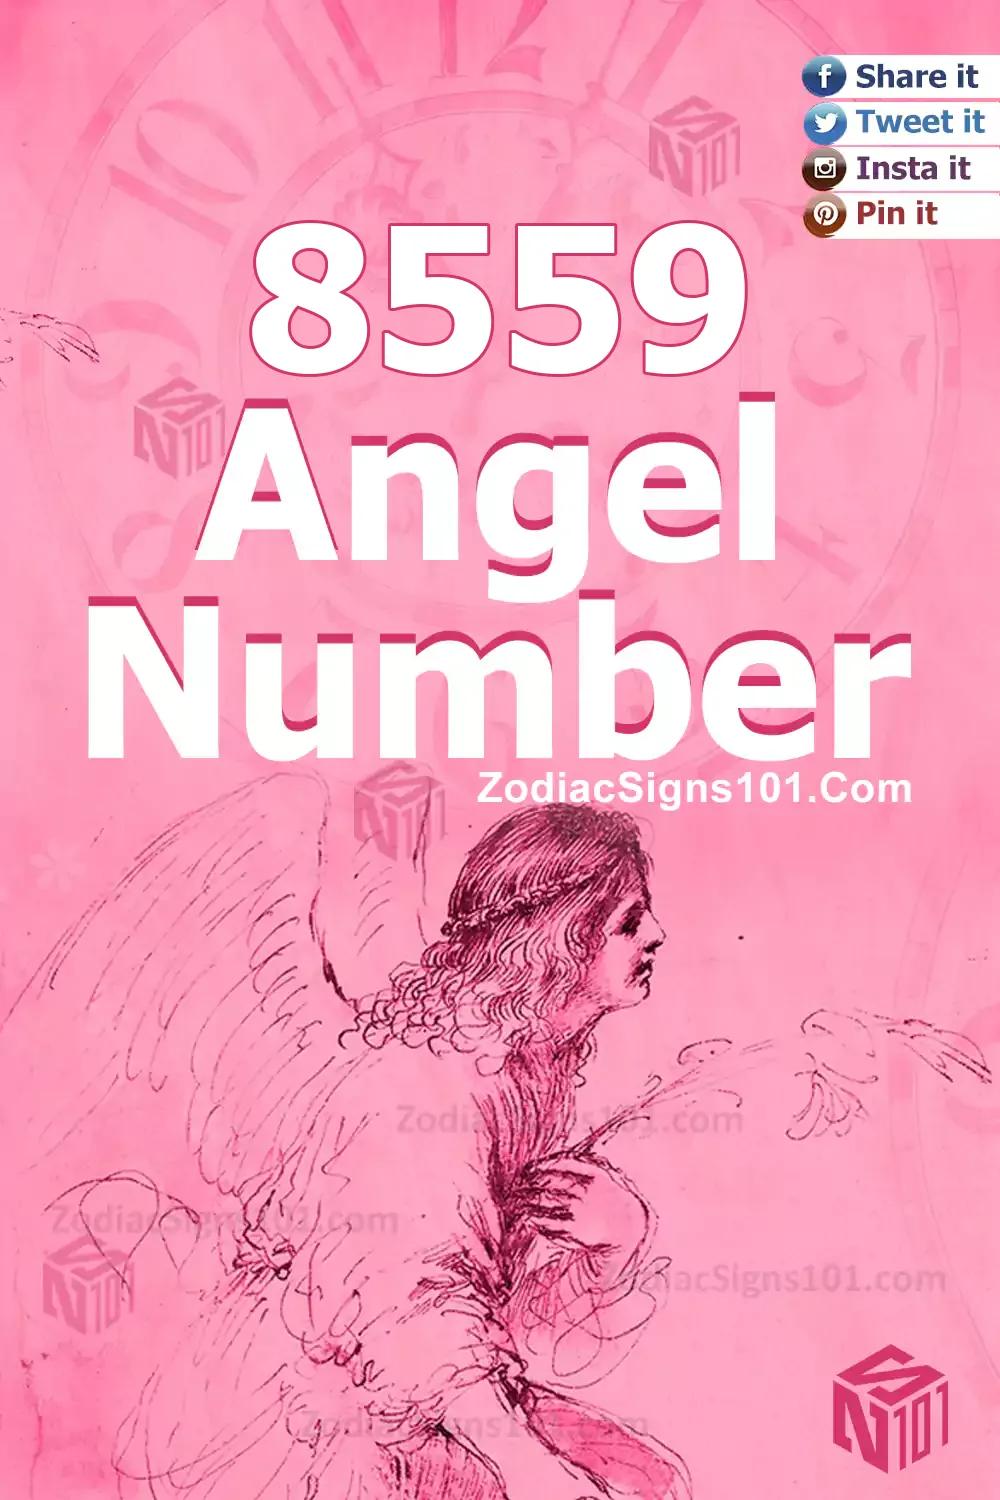 8559 Angel Number Meaning